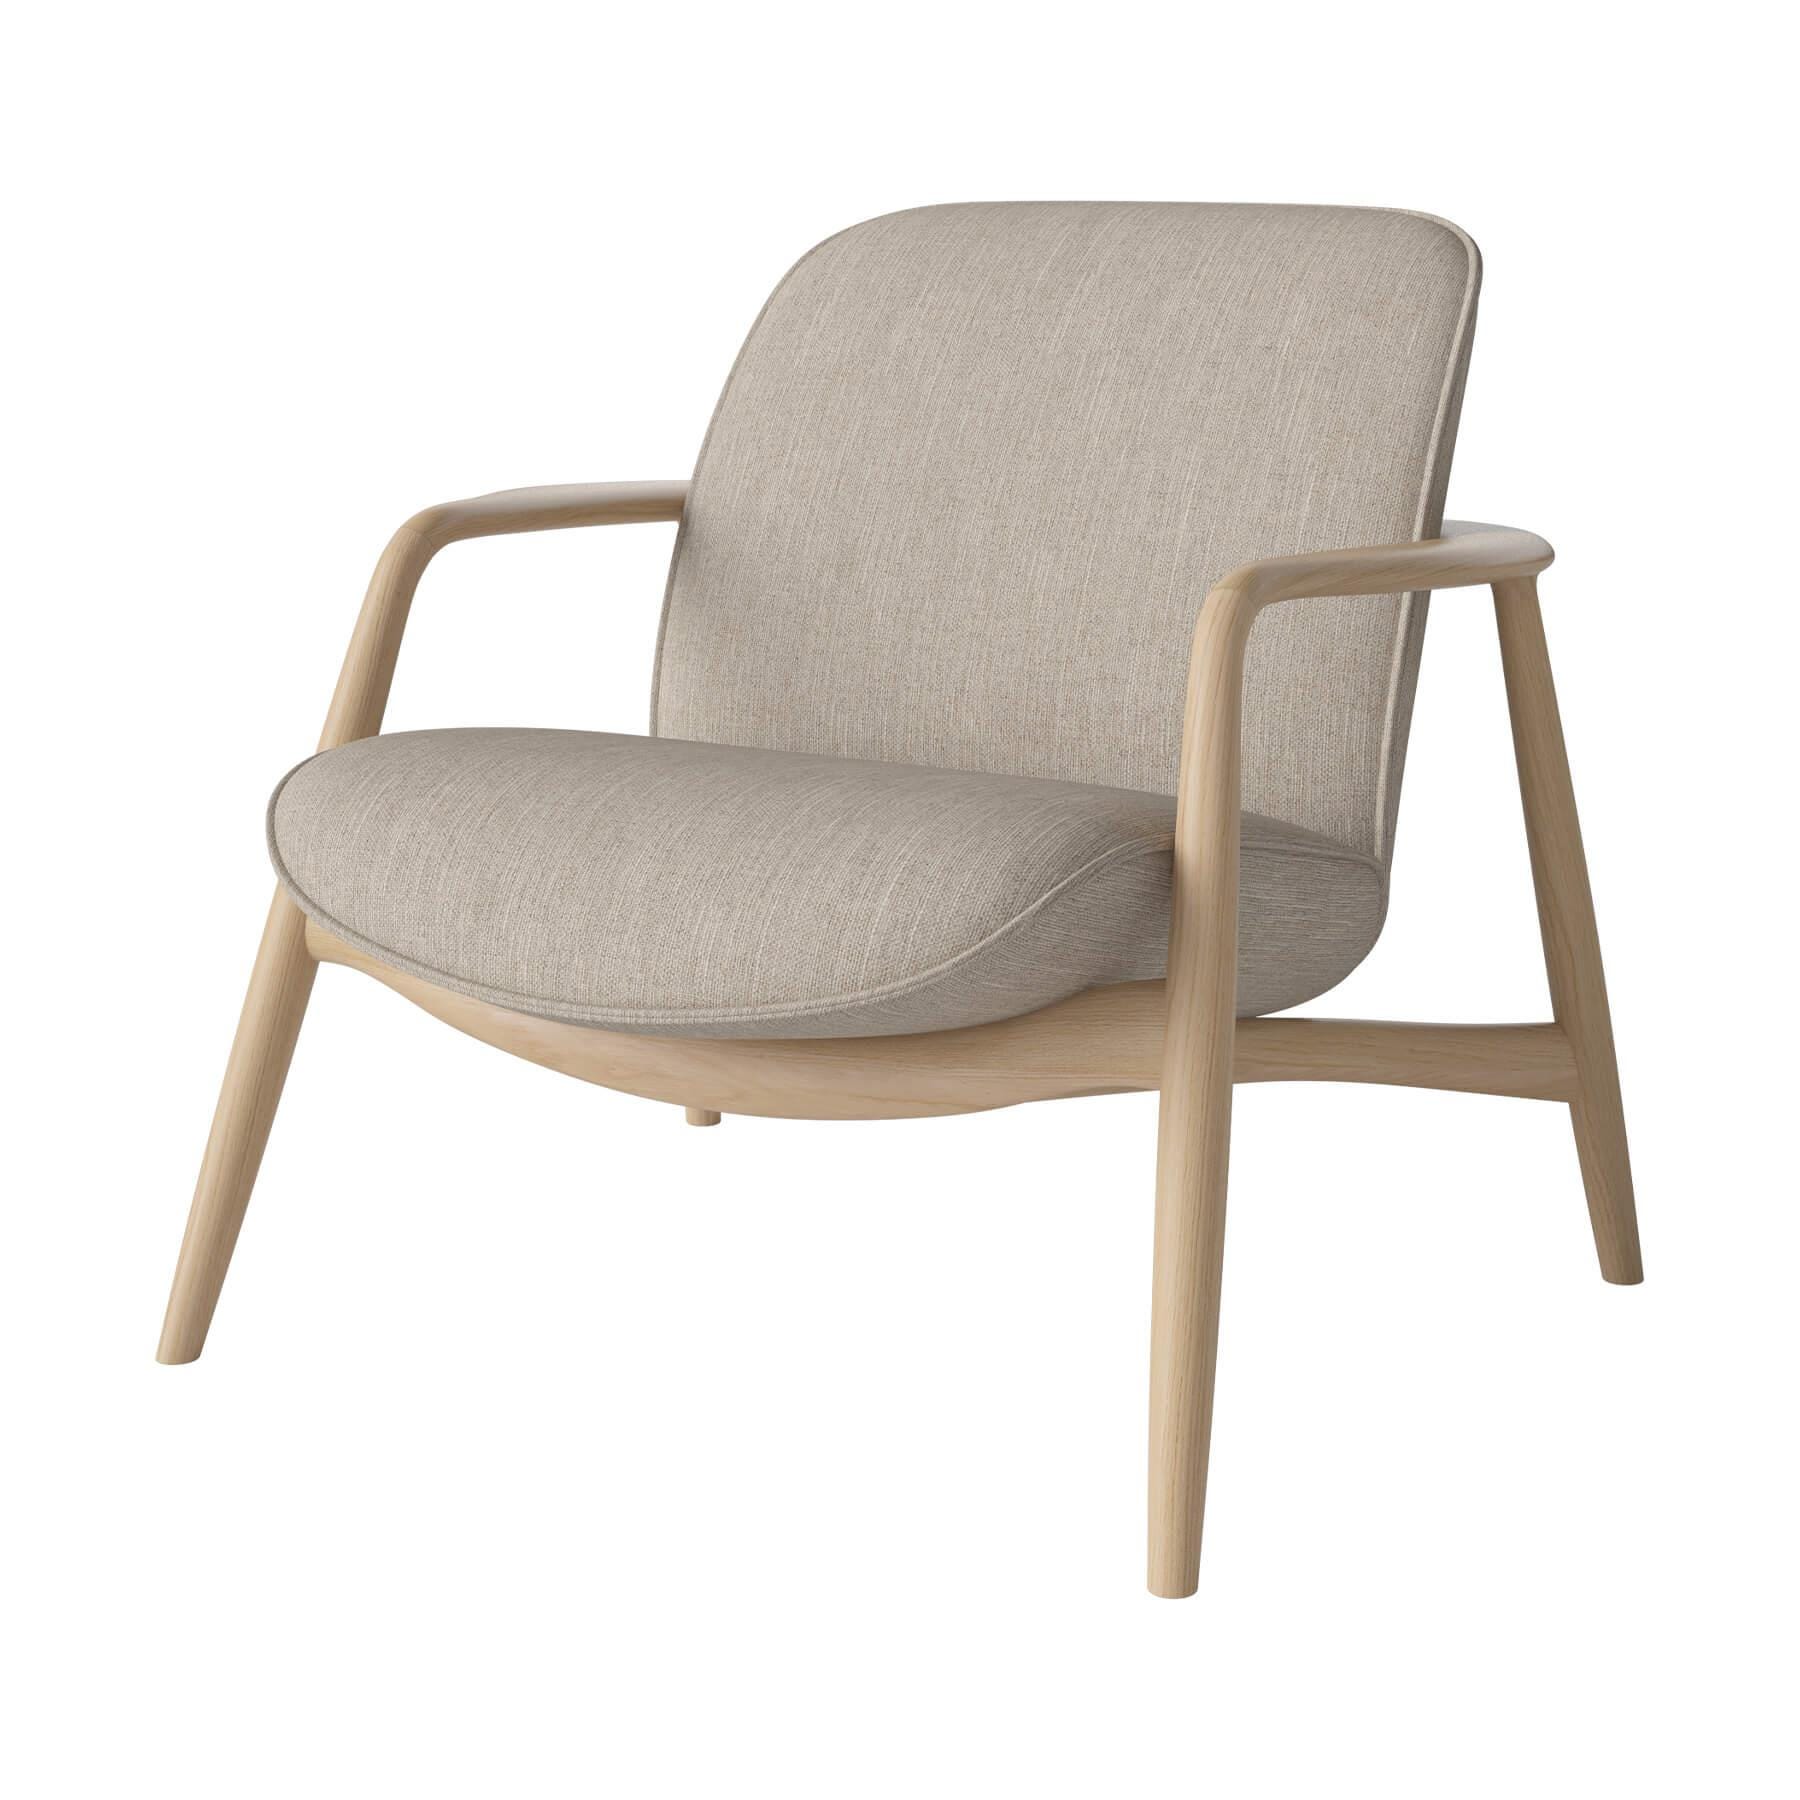 Bolia Bowie Armchair White Oiled Oak Baize Sand Brown Designer Furniture From Holloways Of Ludlow